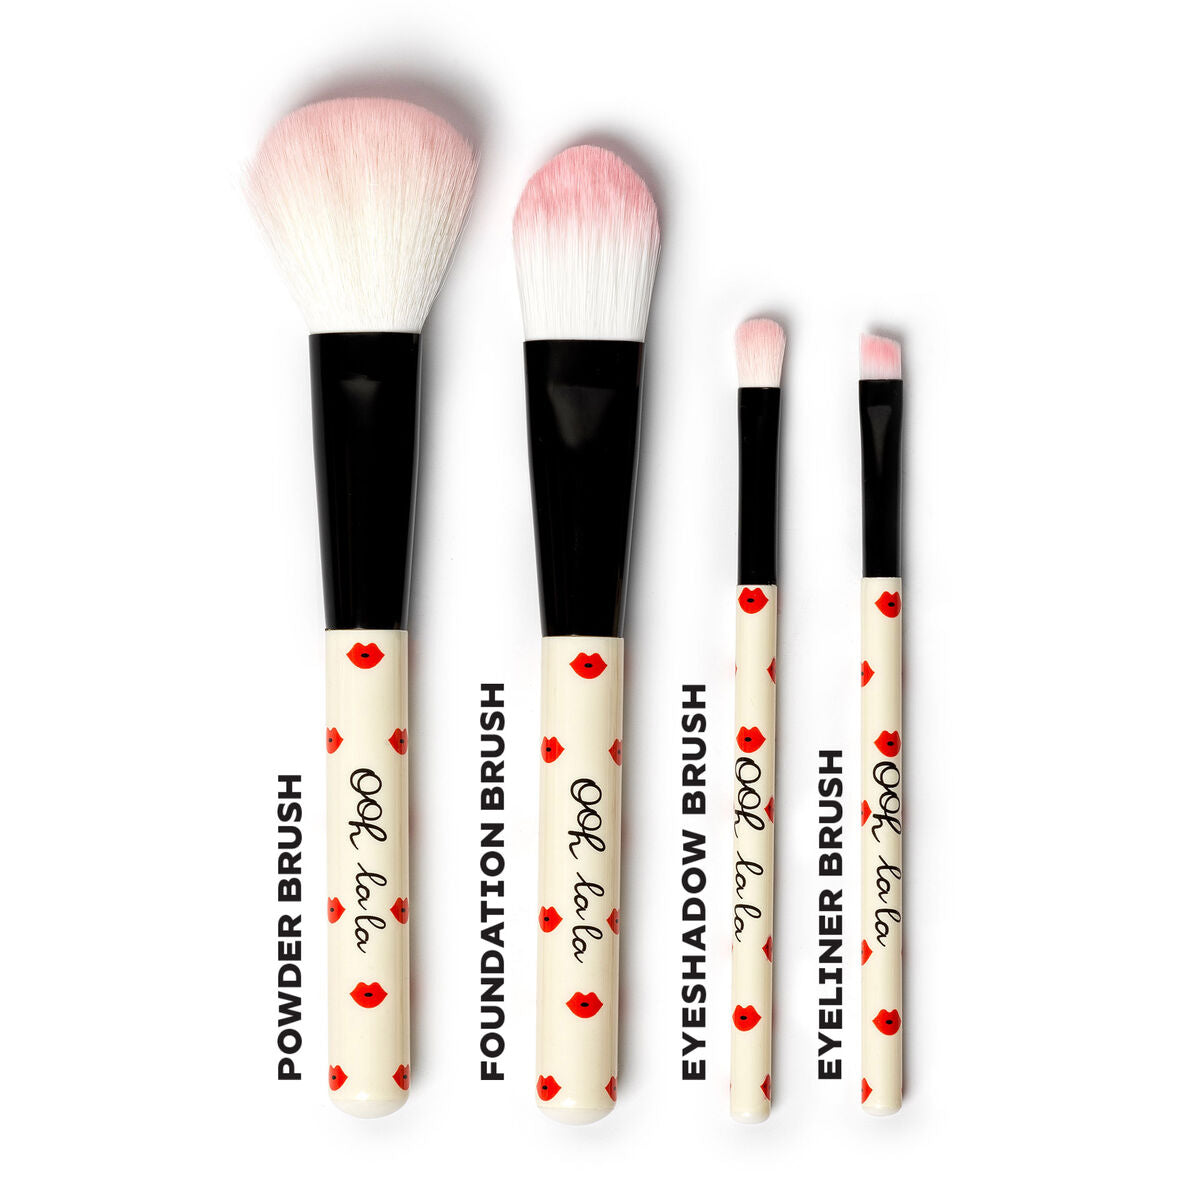 Fab Gifts | Legami Make Up Brushes - Lips by Weirs of Baggot Street